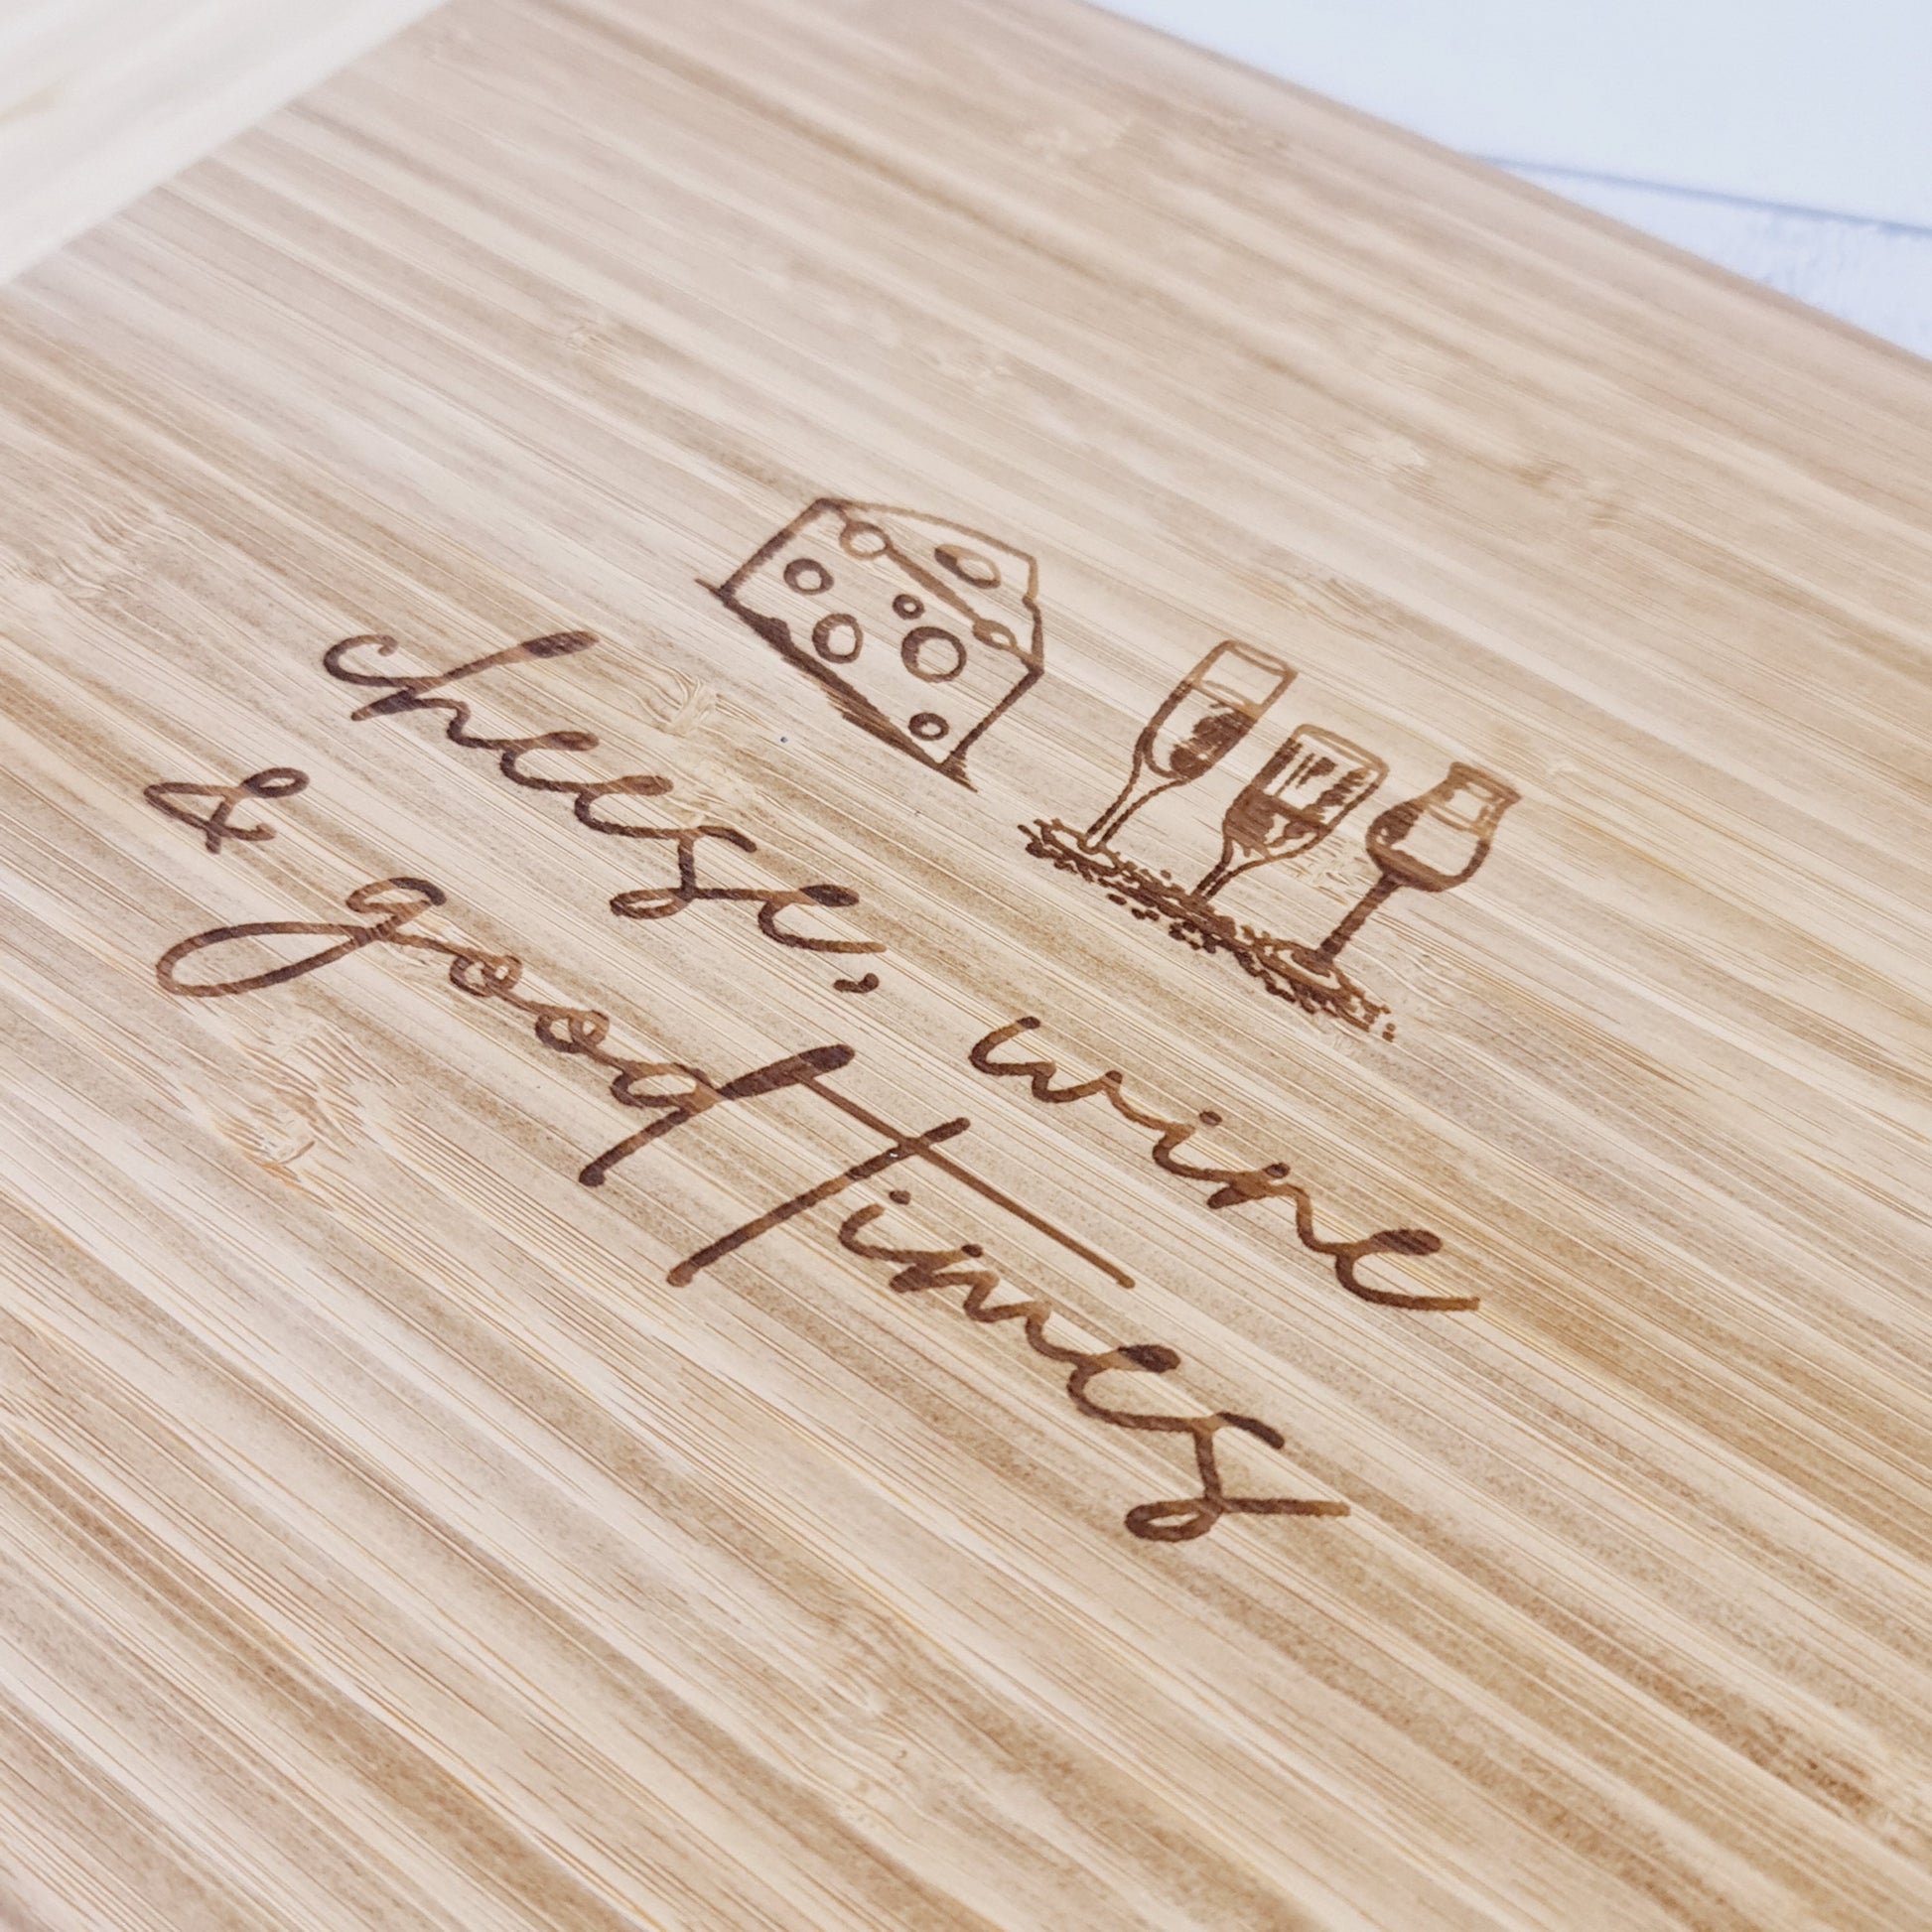 Laser Engraved Bamboo Board with Cheese Wine and Good times